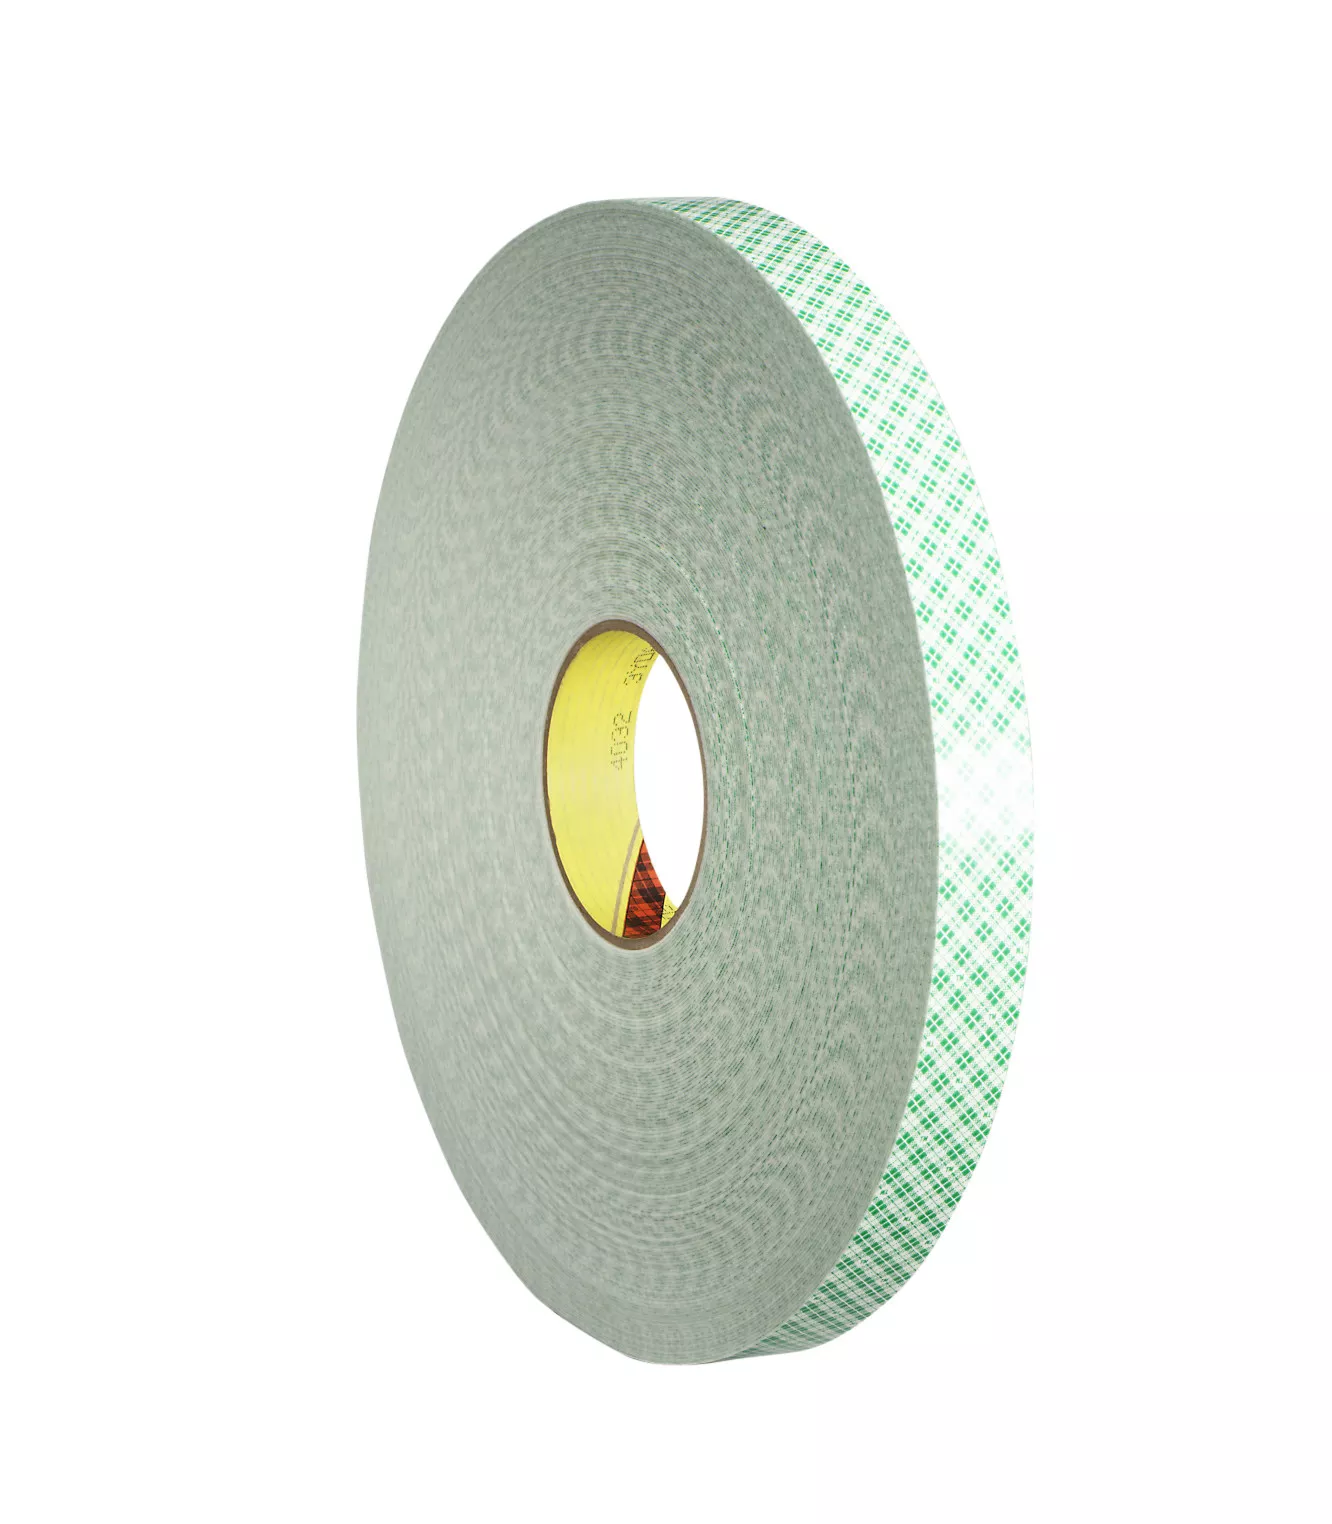 3M™ Double Coated Urethane Foam Tape 4032, Off White, 3/4 in x 72 yd, 31
mil, 12 Rolls/Case